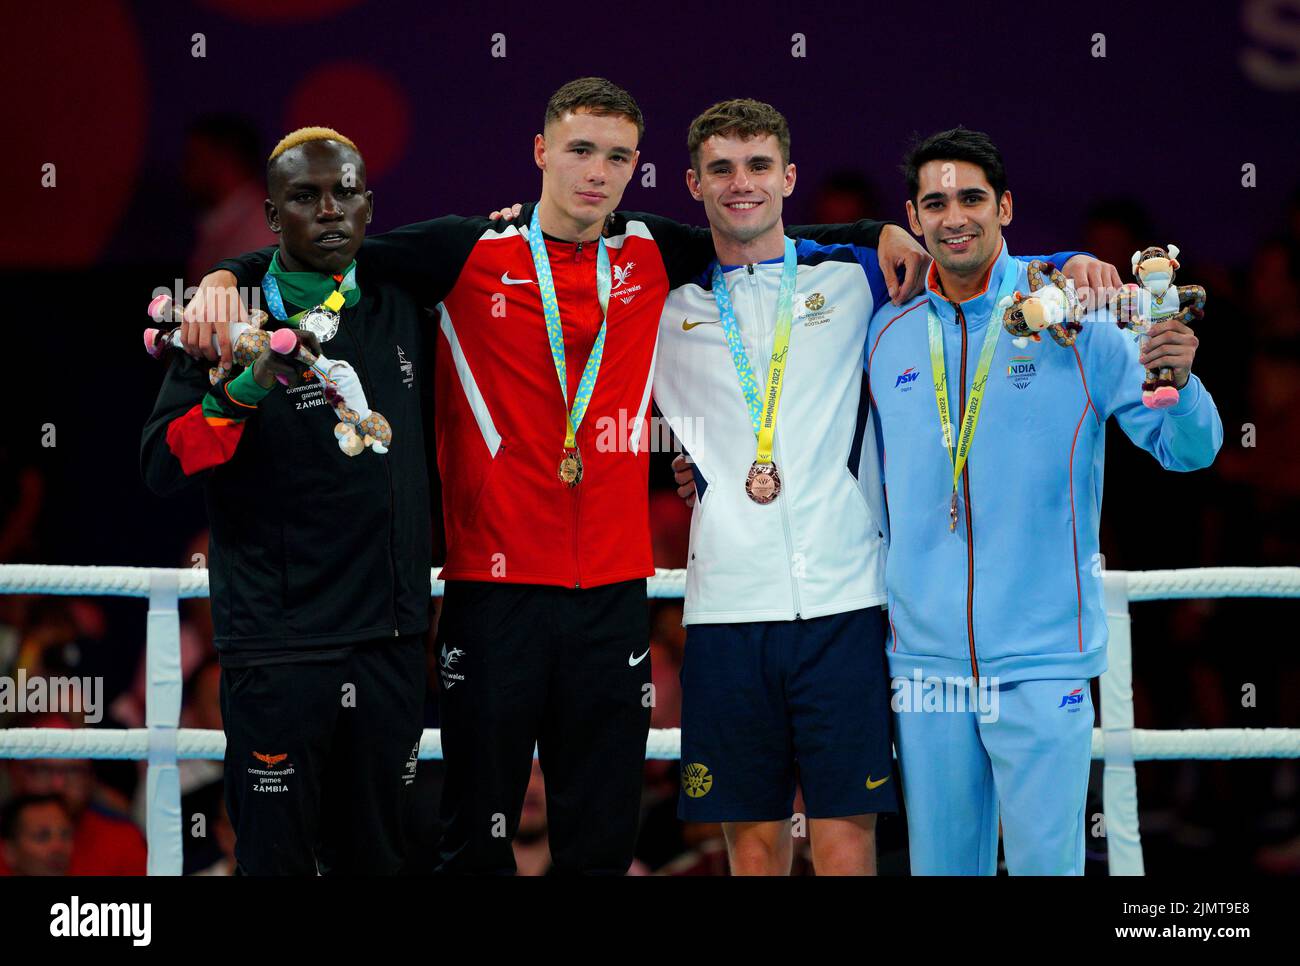 Wales' Iaon Croft (second left) with his gold medal after winning the Men's Welter (63.5-67kg) Final, alongside silver medallist Zambia's Stephen Zimba (left) and bronze medallists Scotland's Tyler Jolly (second right) and India's Rohit Tokas at The NEC on day ten of the 2022 Commonwealth Games in Birmingham. Picture date: Sunday August 7, 2022. Stock Photo